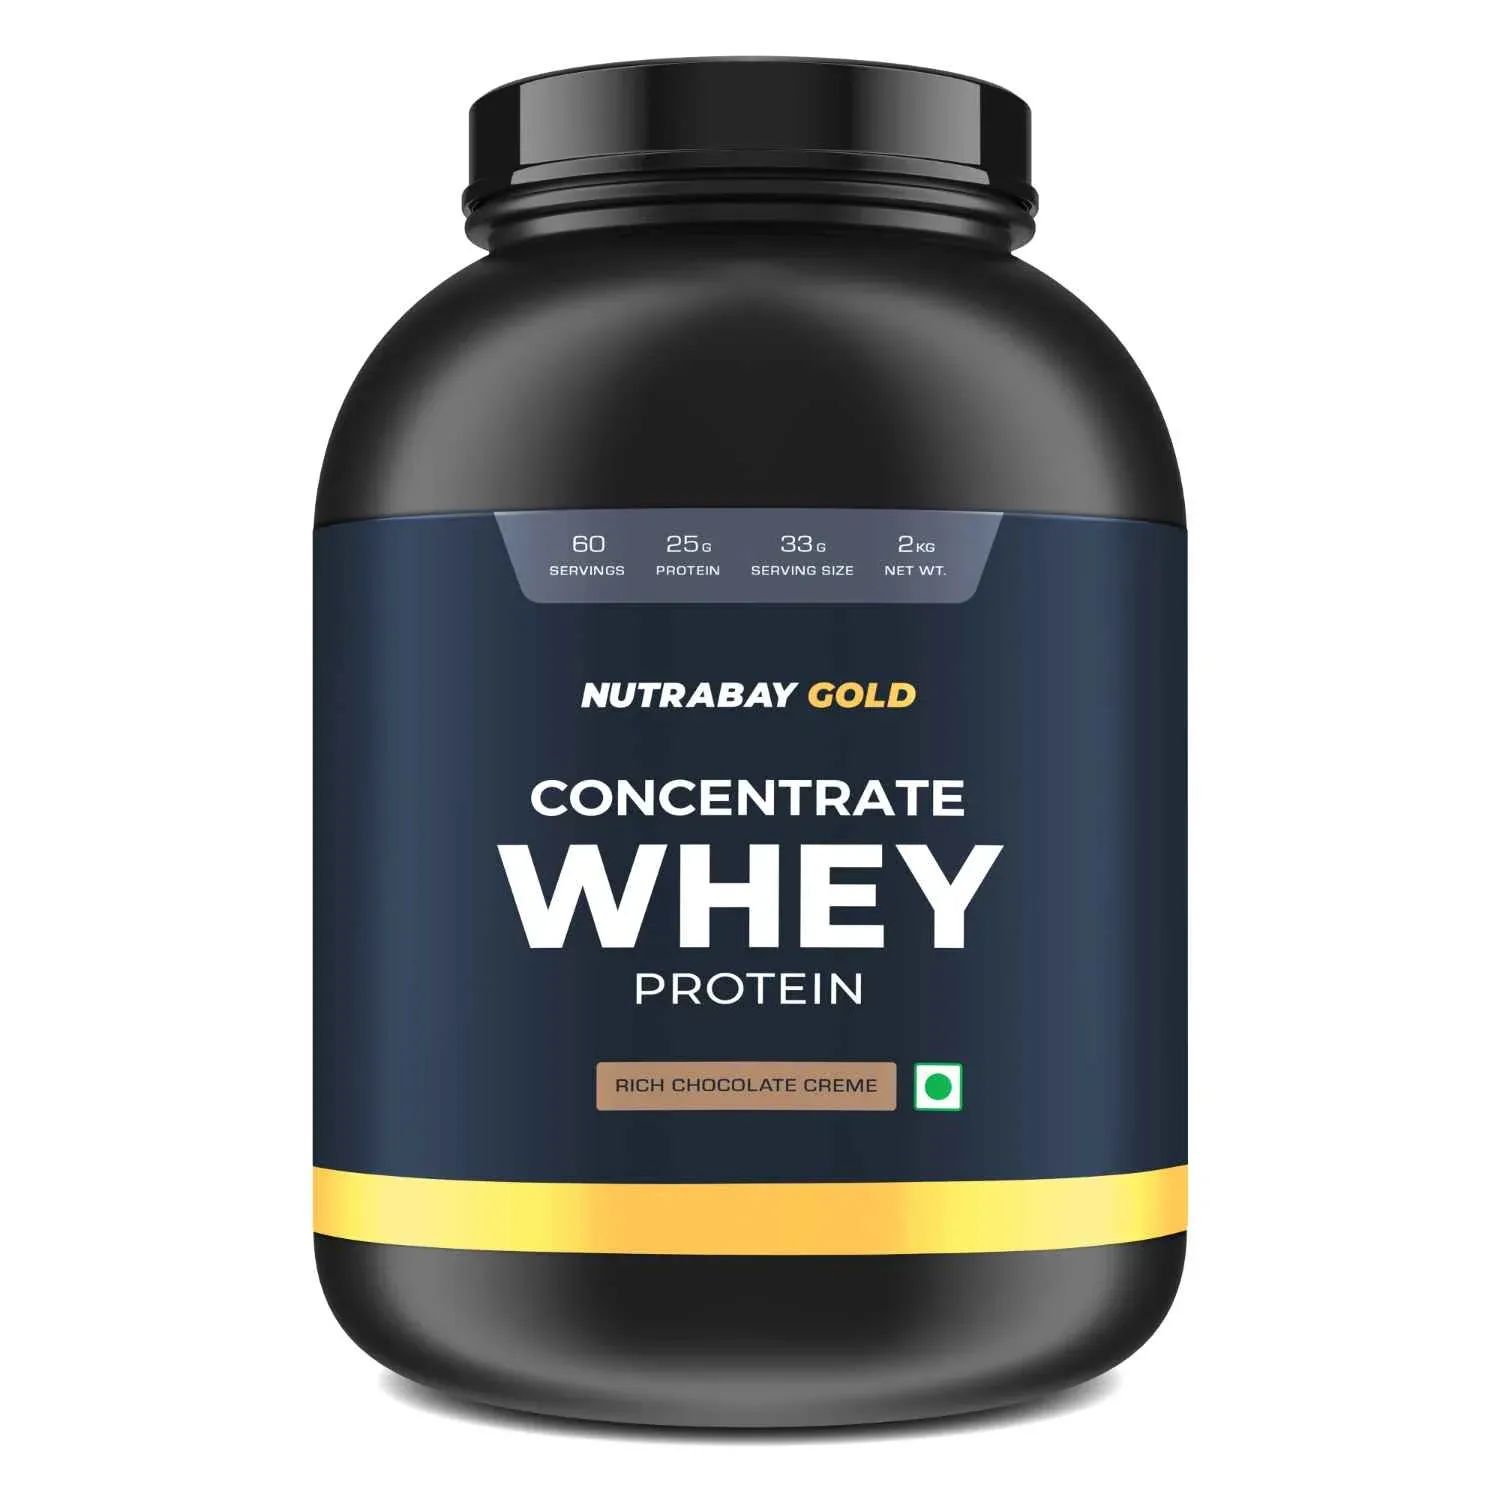 Nutrabay Gold 100% Whey Protein Concentrate Image